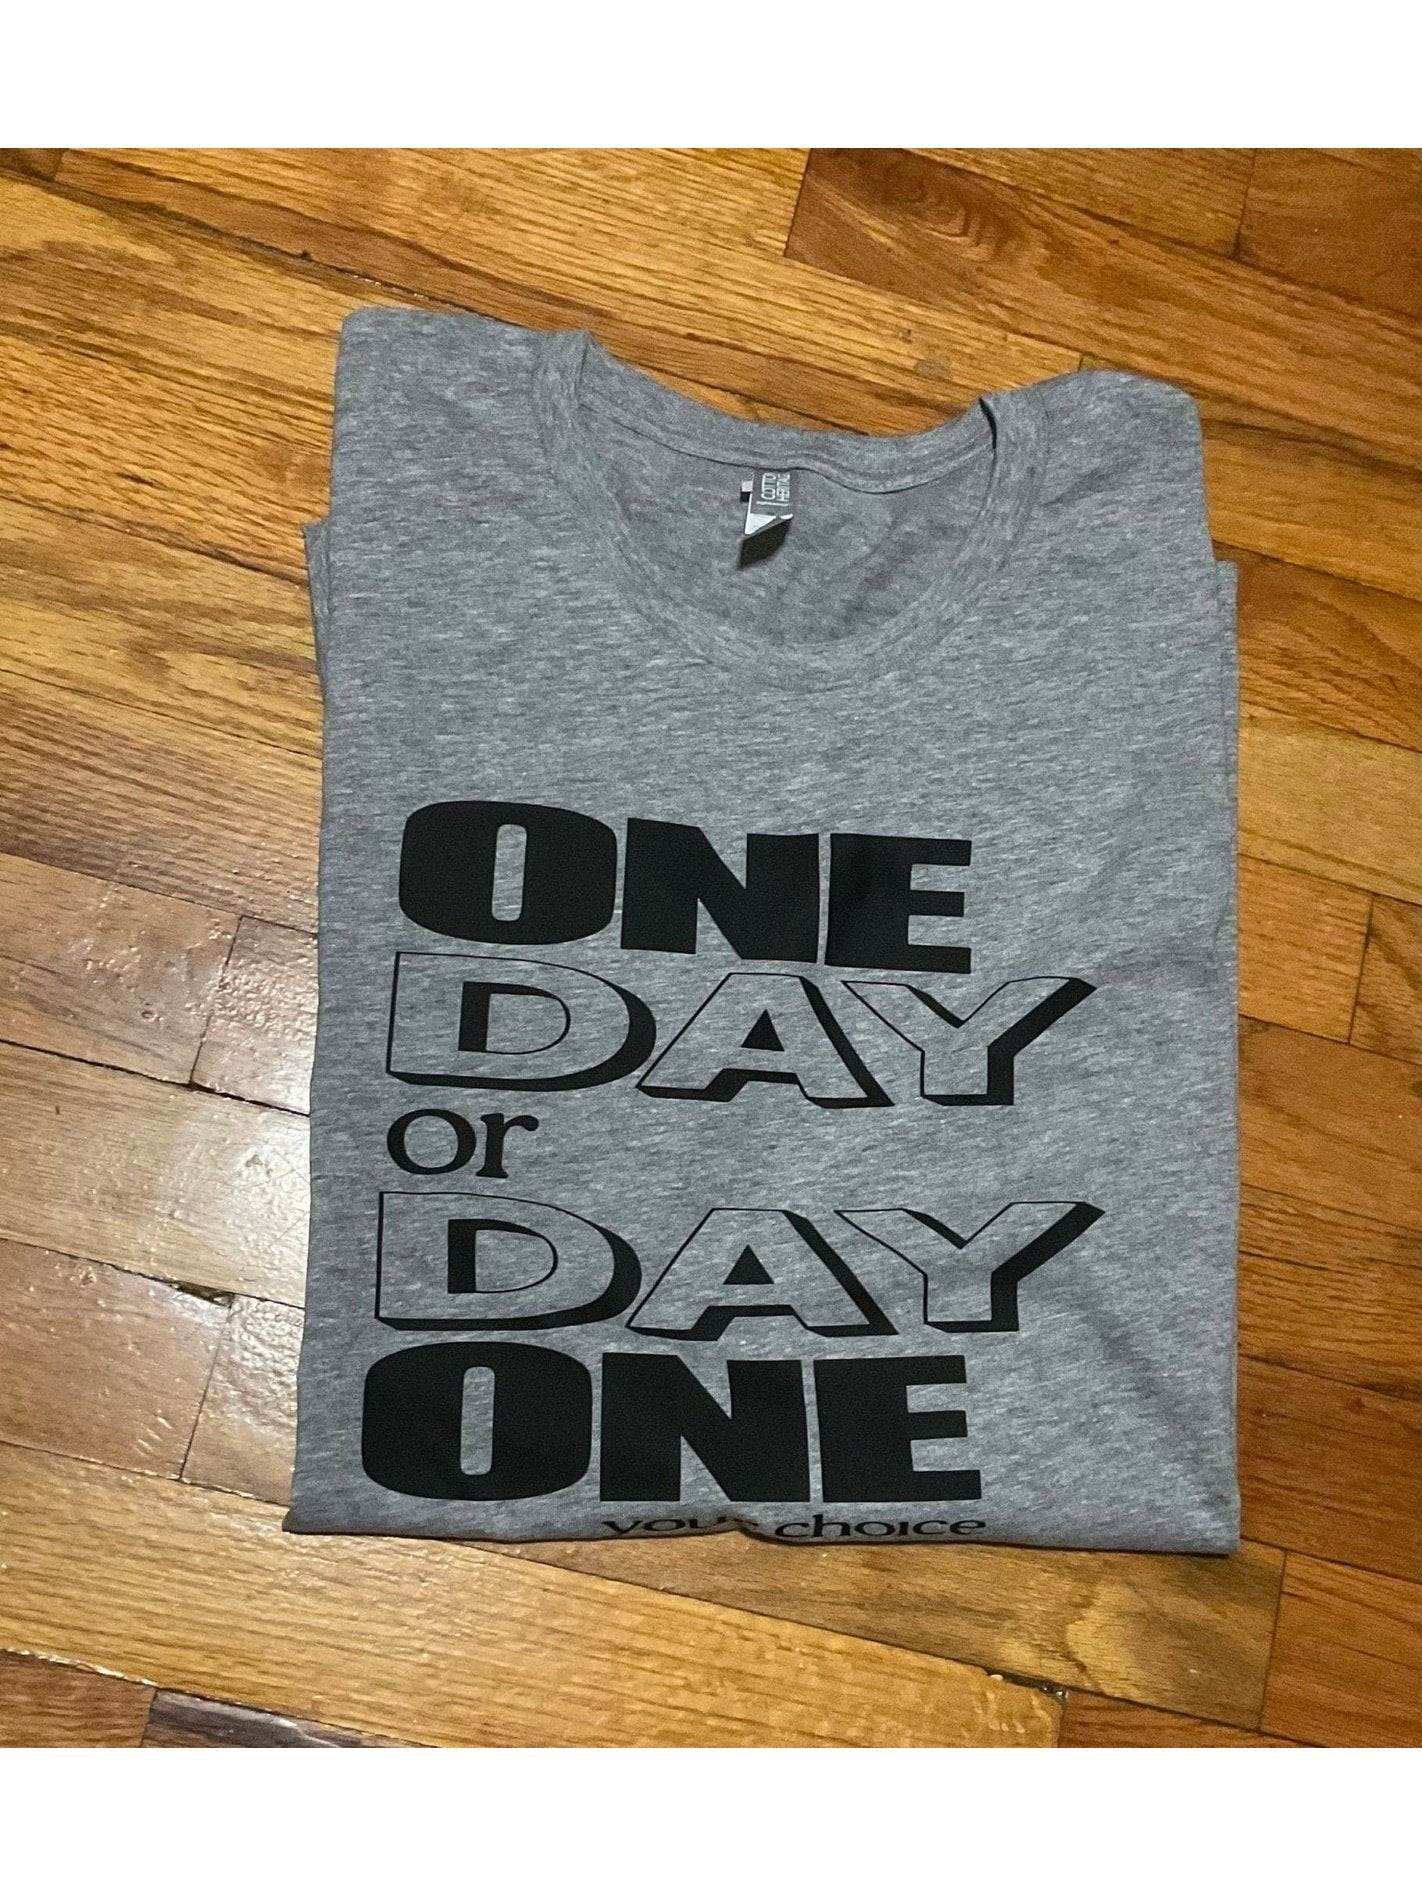 One Day or Day One T-Shirt - BKFJNY